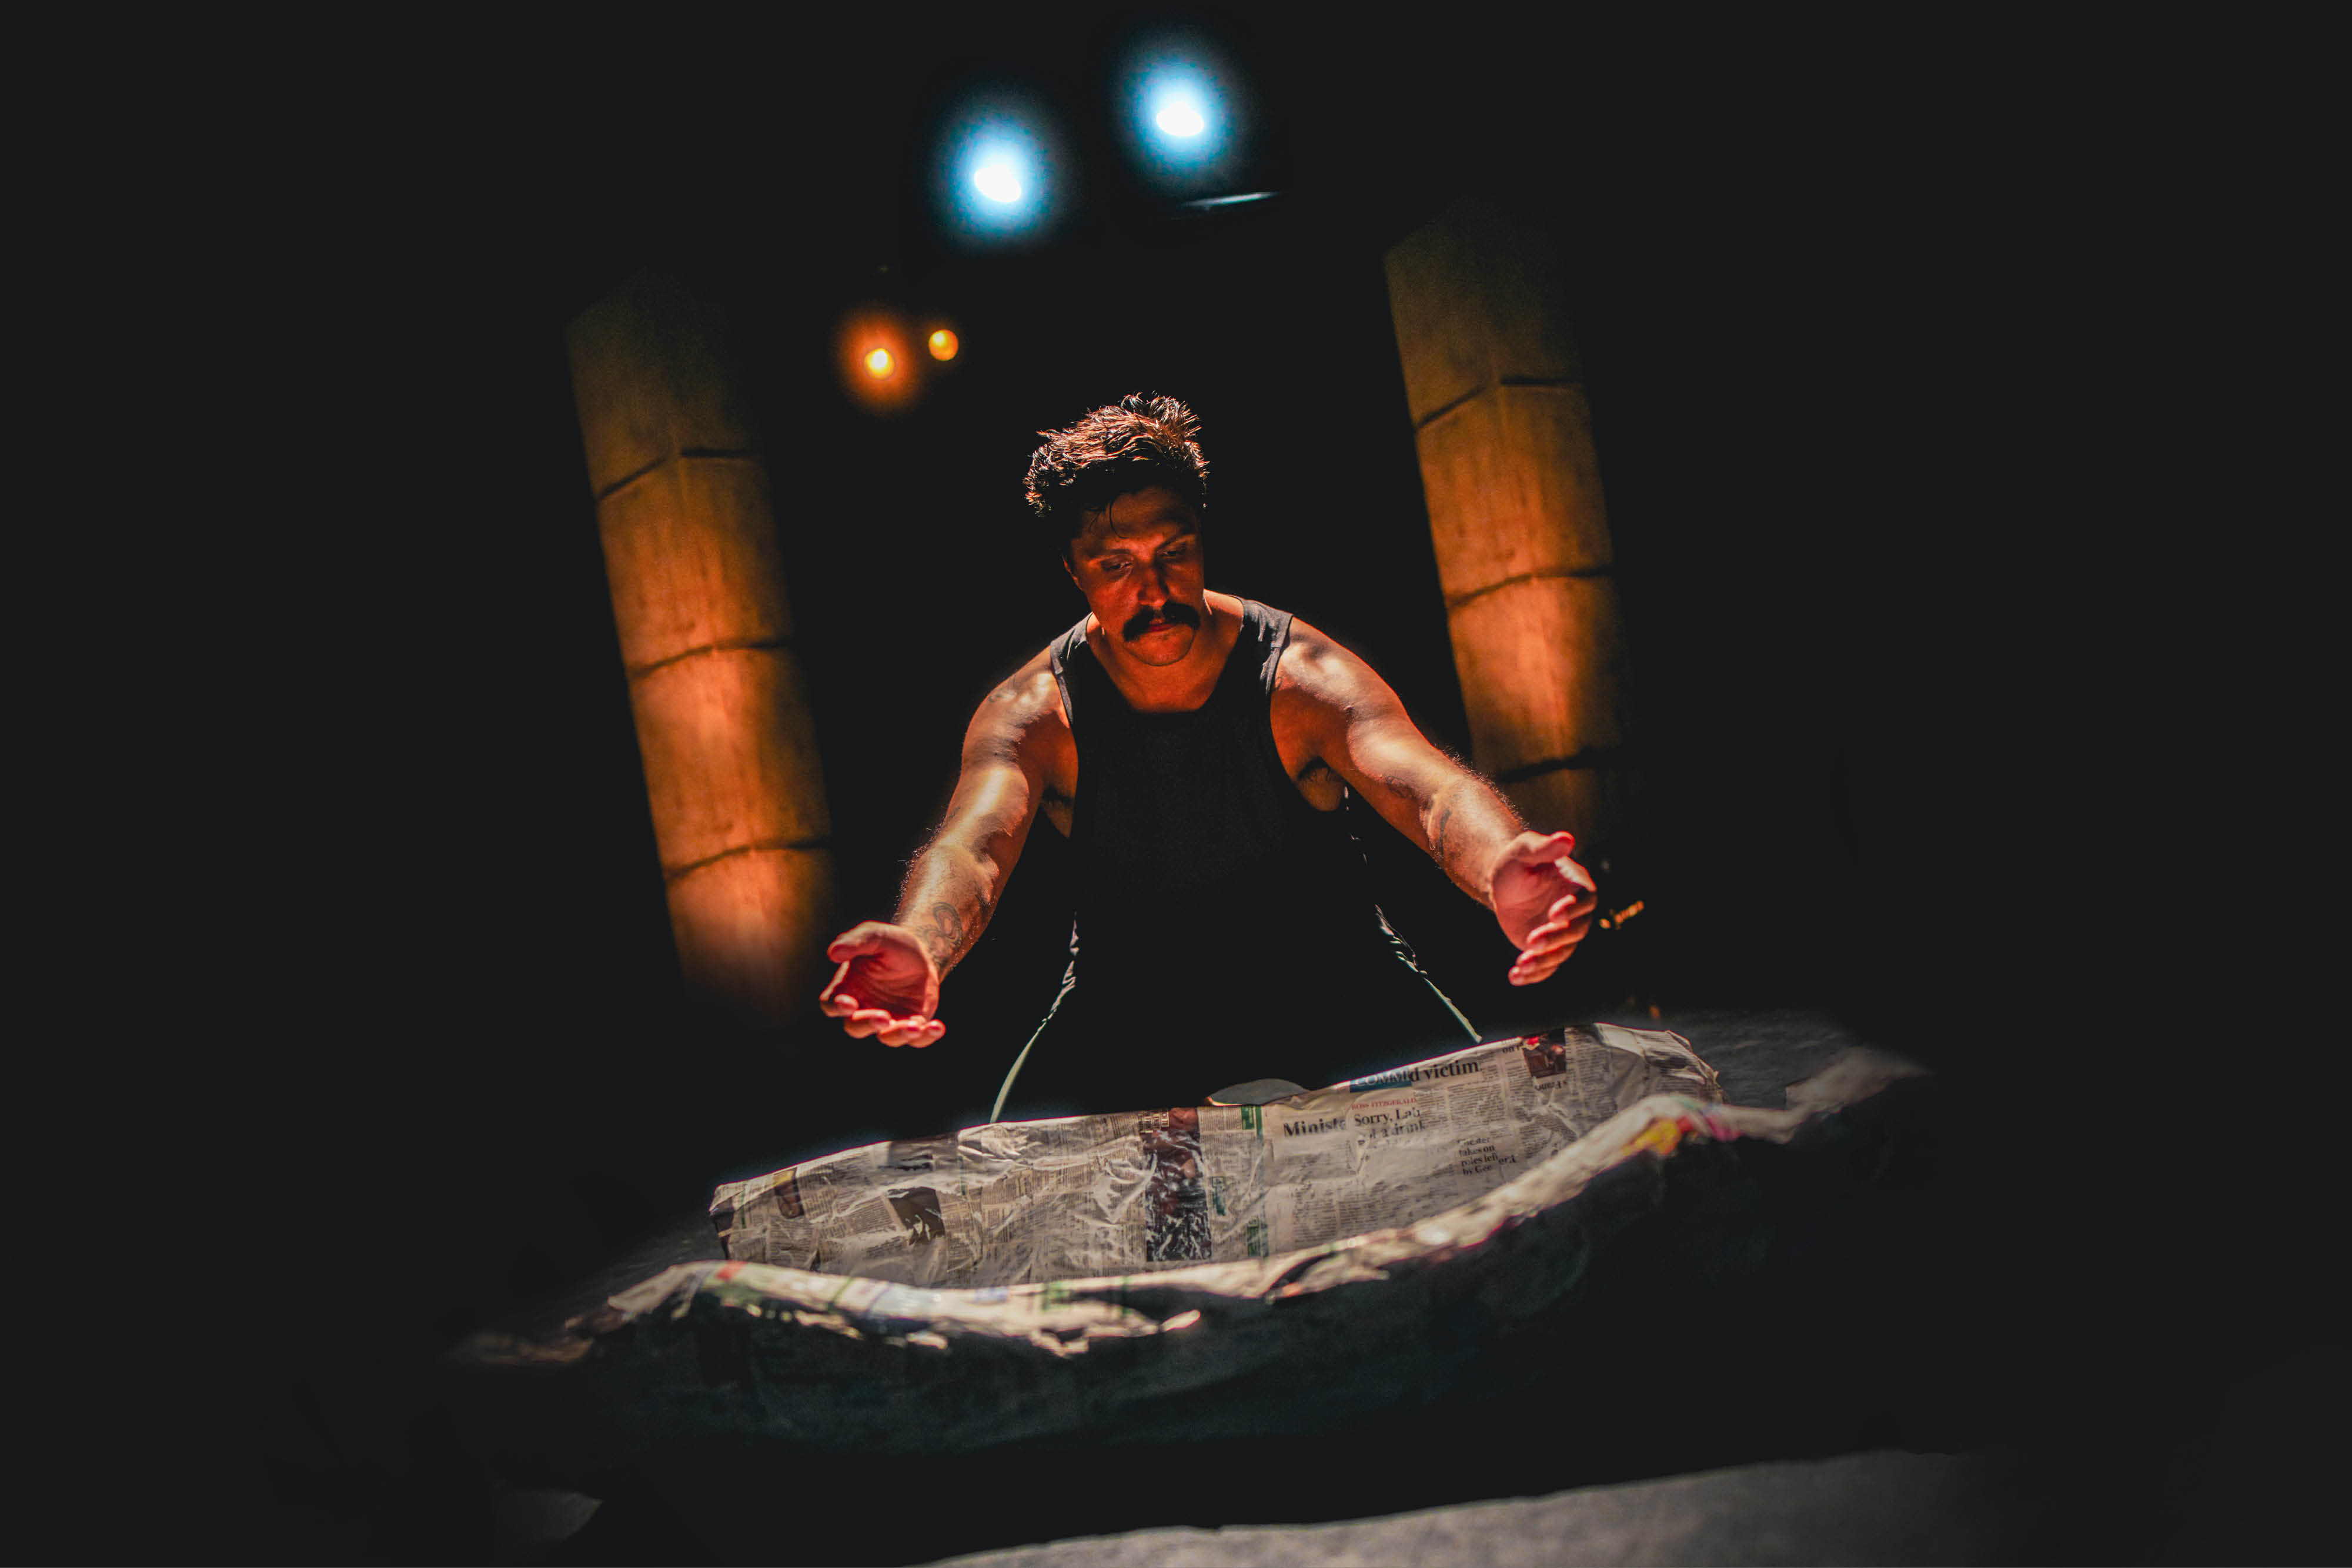 A man stands with arms outstretched above a coolomon vessel made from paper mache. He is spotlighted by stage lights and surrounded by darkness. 